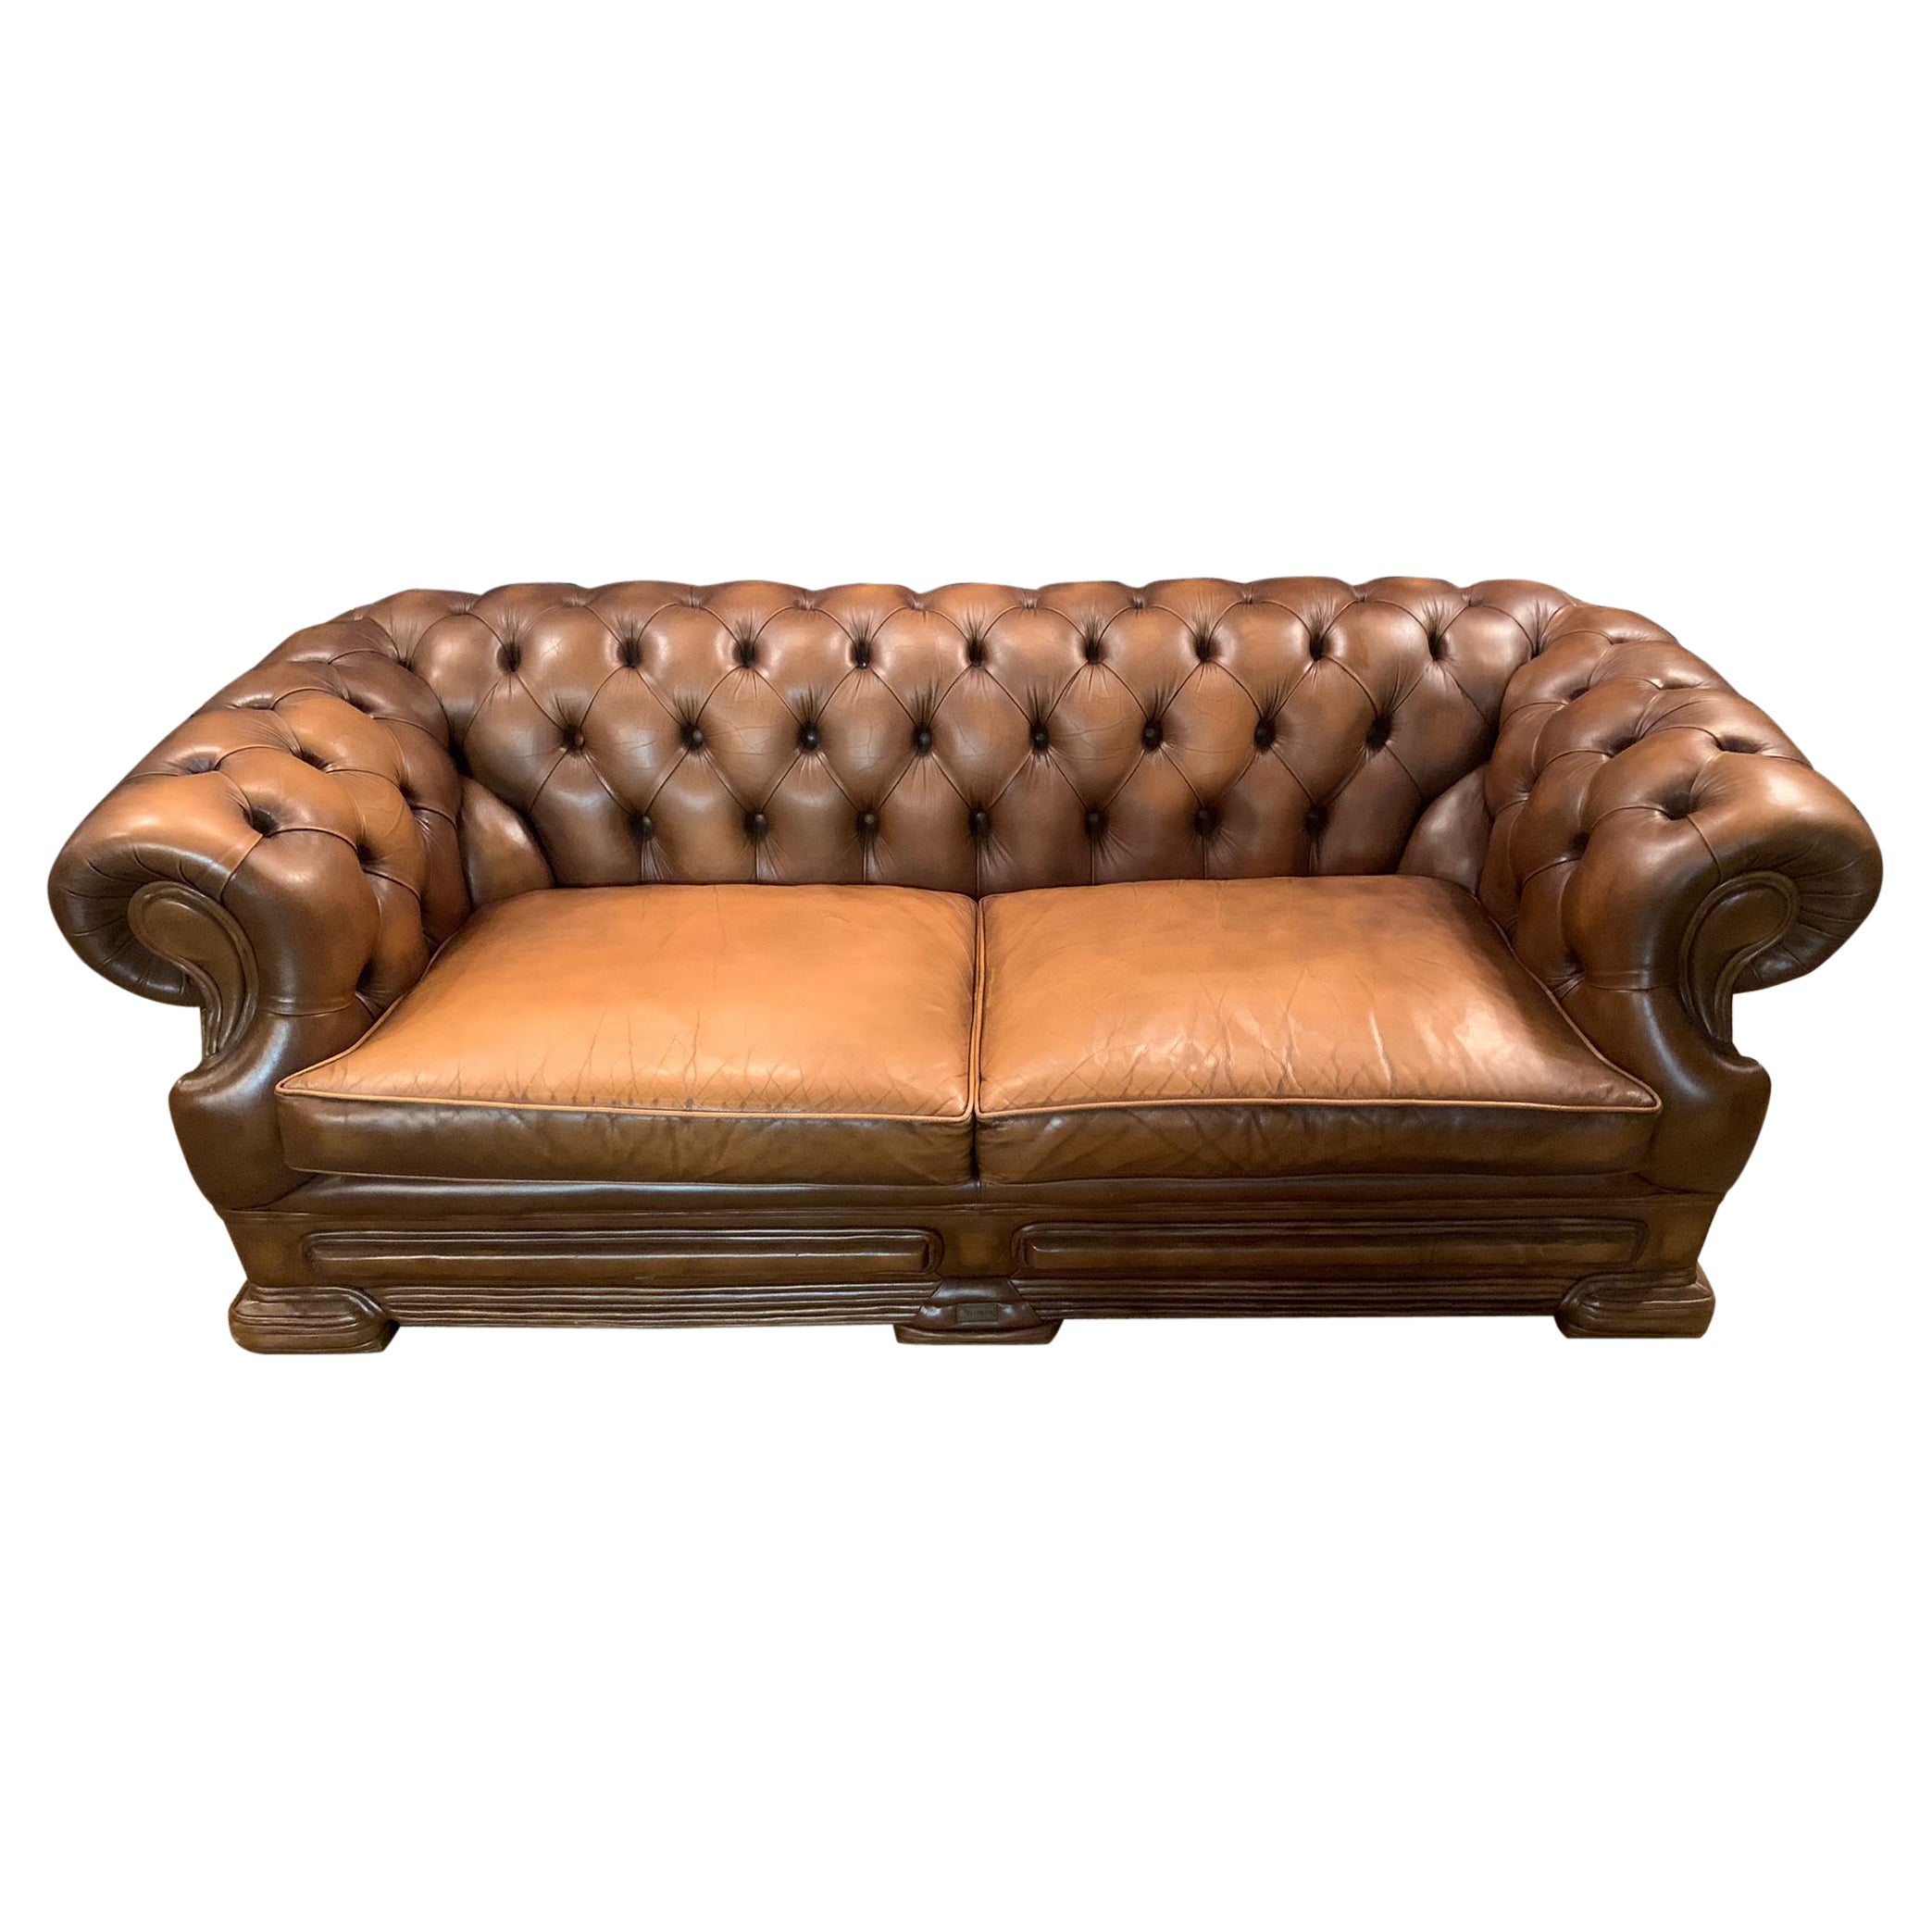 Vintage Chesterfield Sofa from a Set Brand Dellbrook England